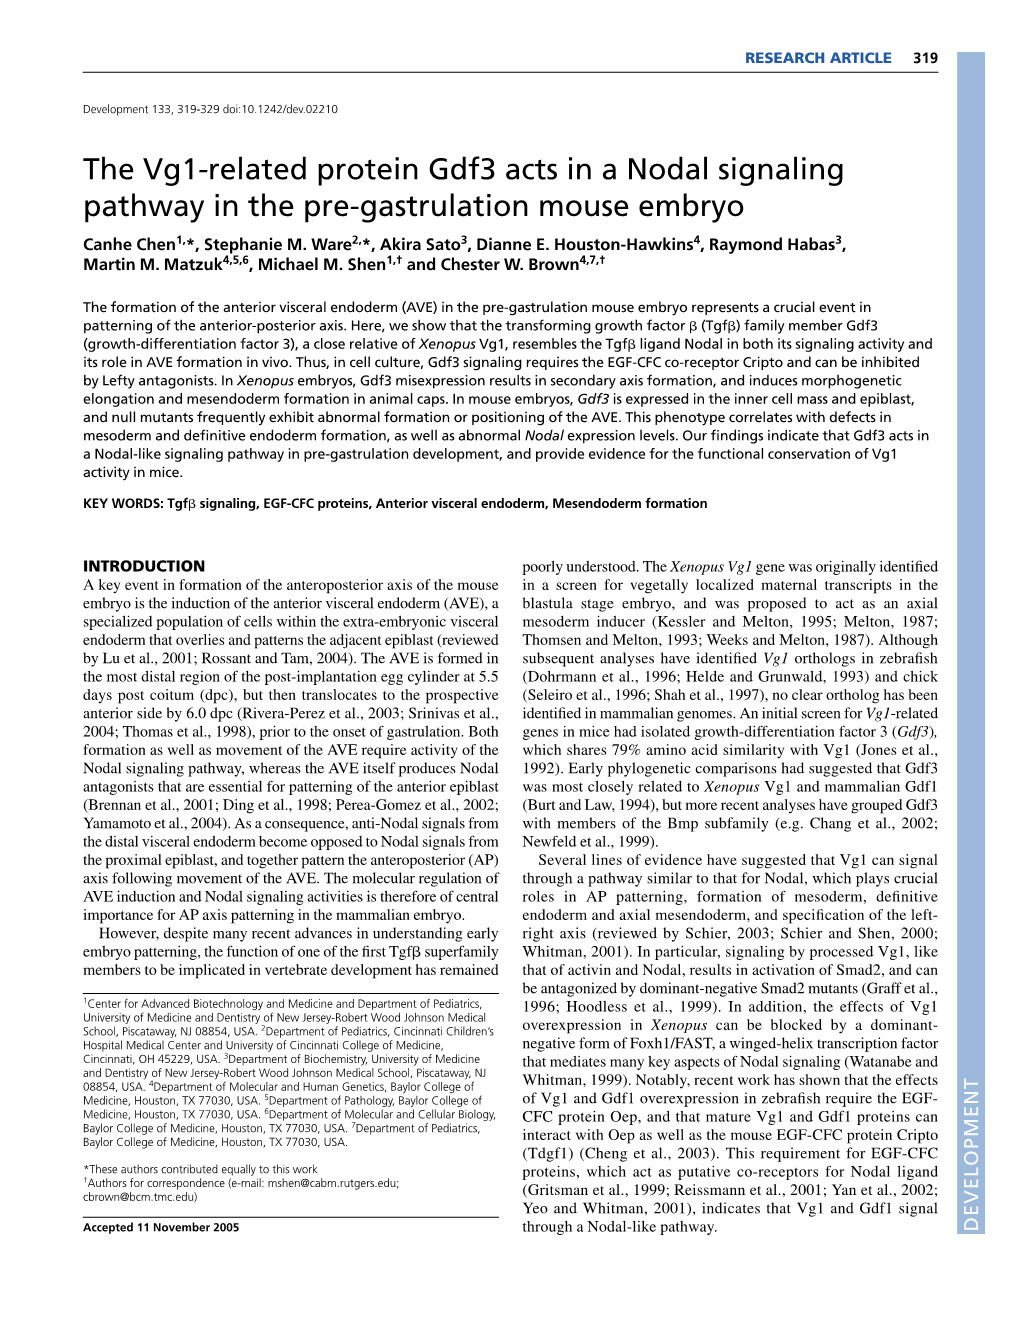 The Vg1-Related Protein Gdf3 Acts in a Nodal Signaling Pathway in the Pre